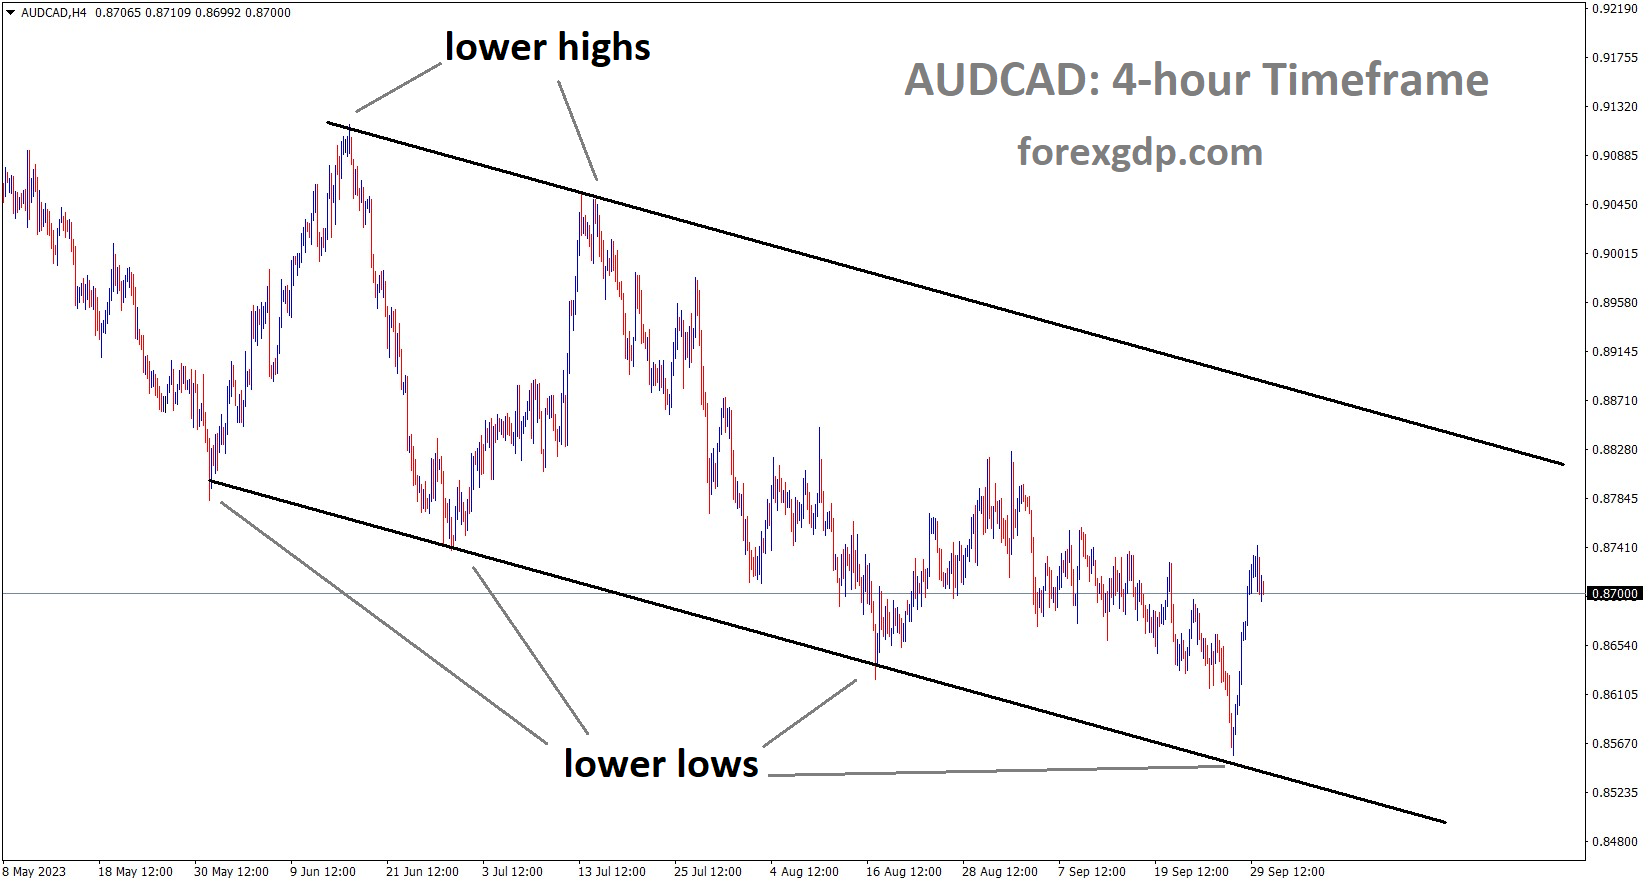 AUDCAD is moving in the Descending channel and the market has rebounded from the lower low area of the channel